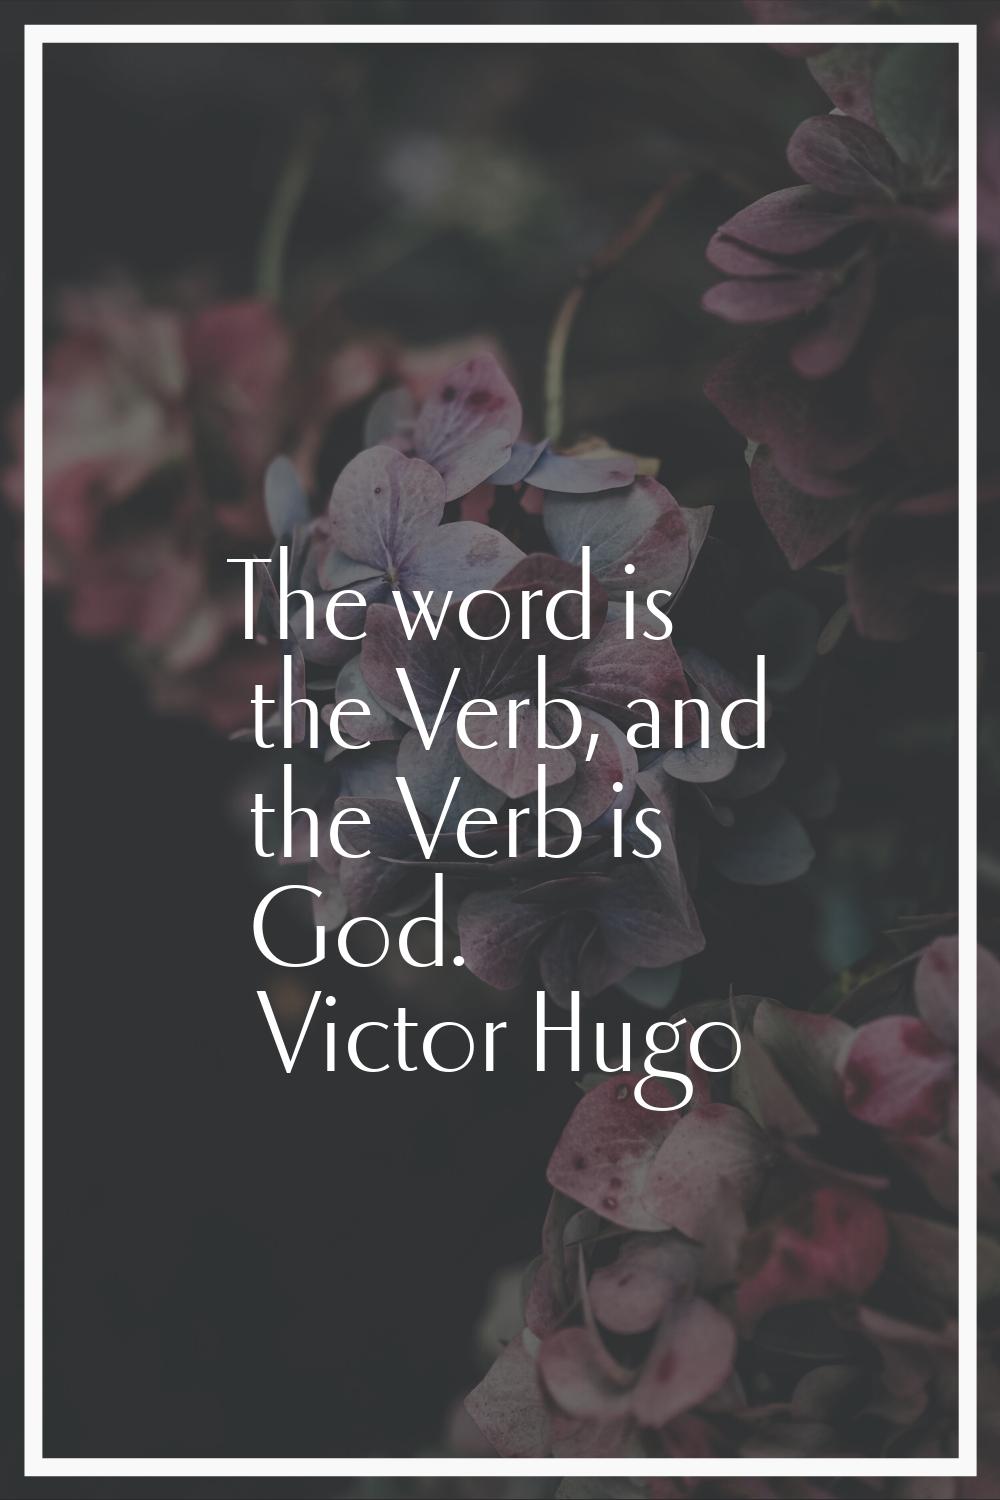 The word is the Verb, and the Verb is God.